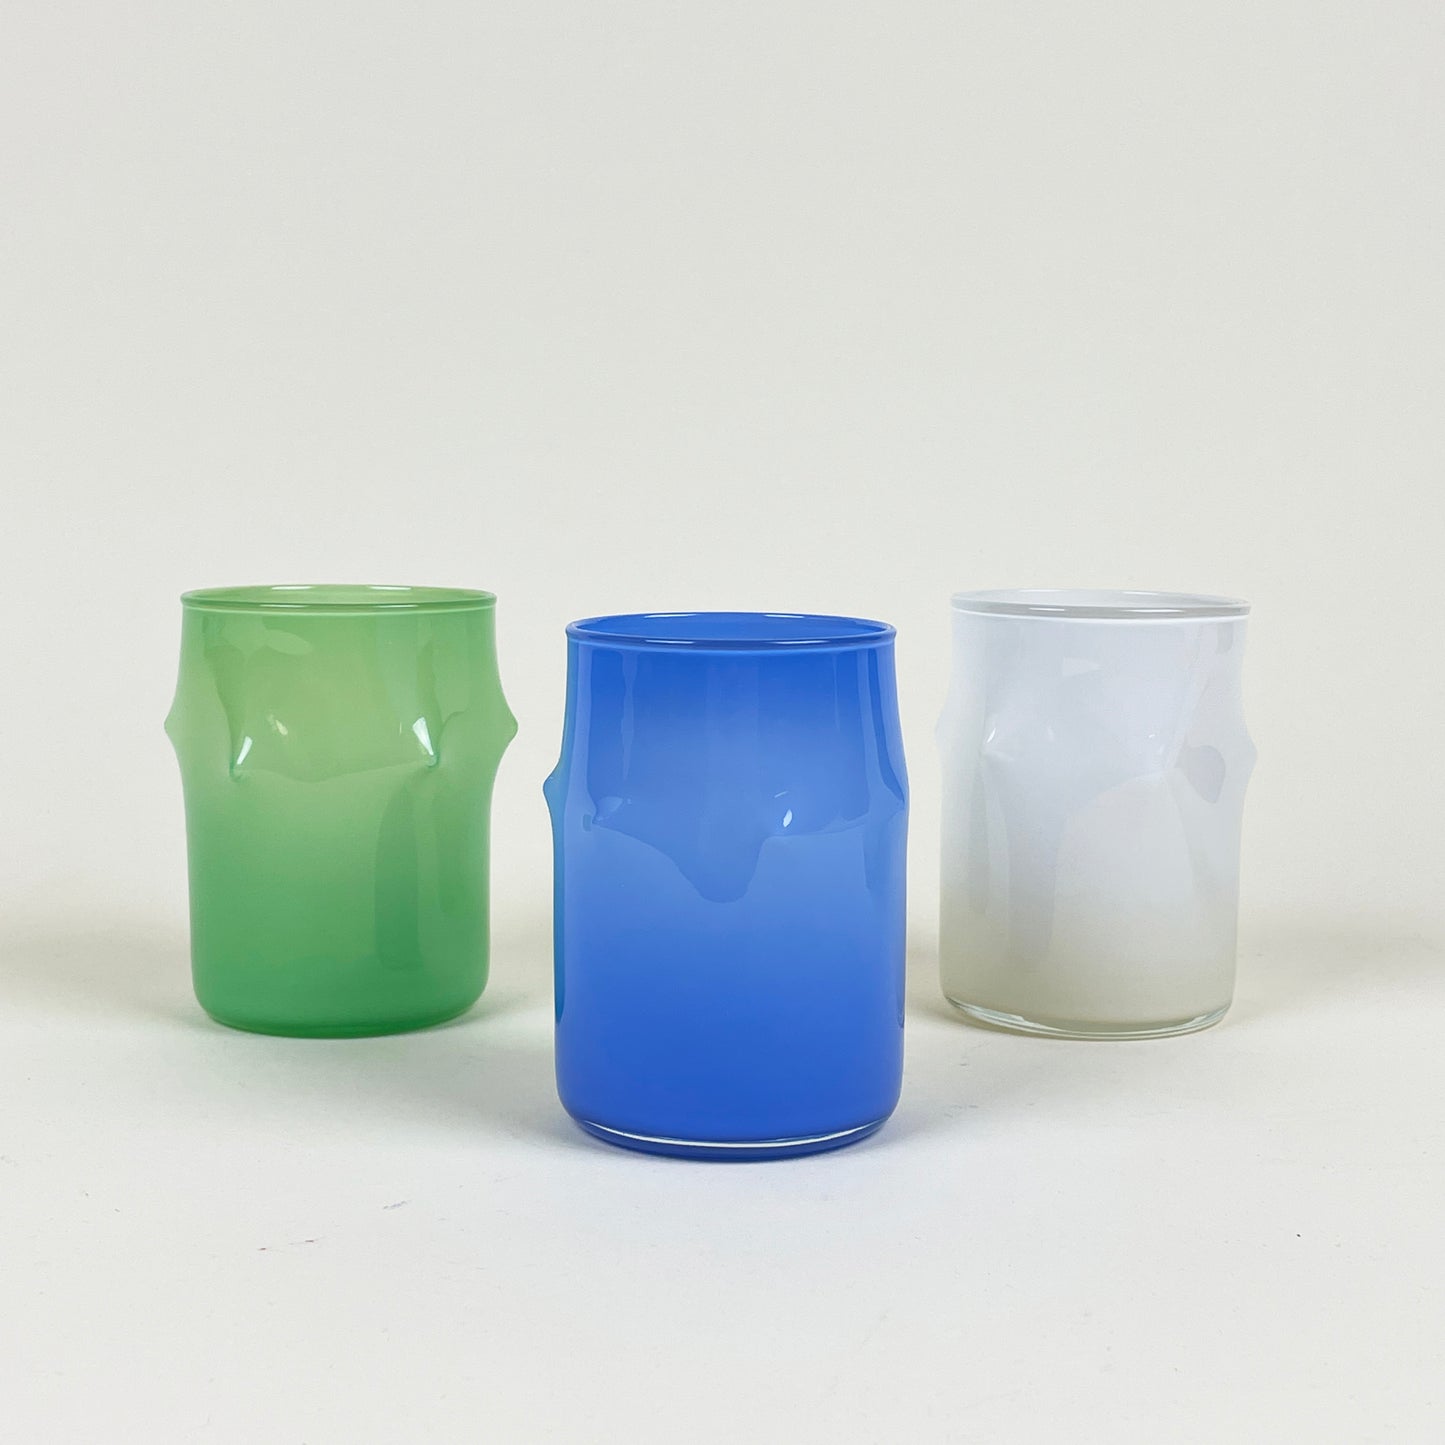 Drinking glass (cream white) by Silje Lindrup